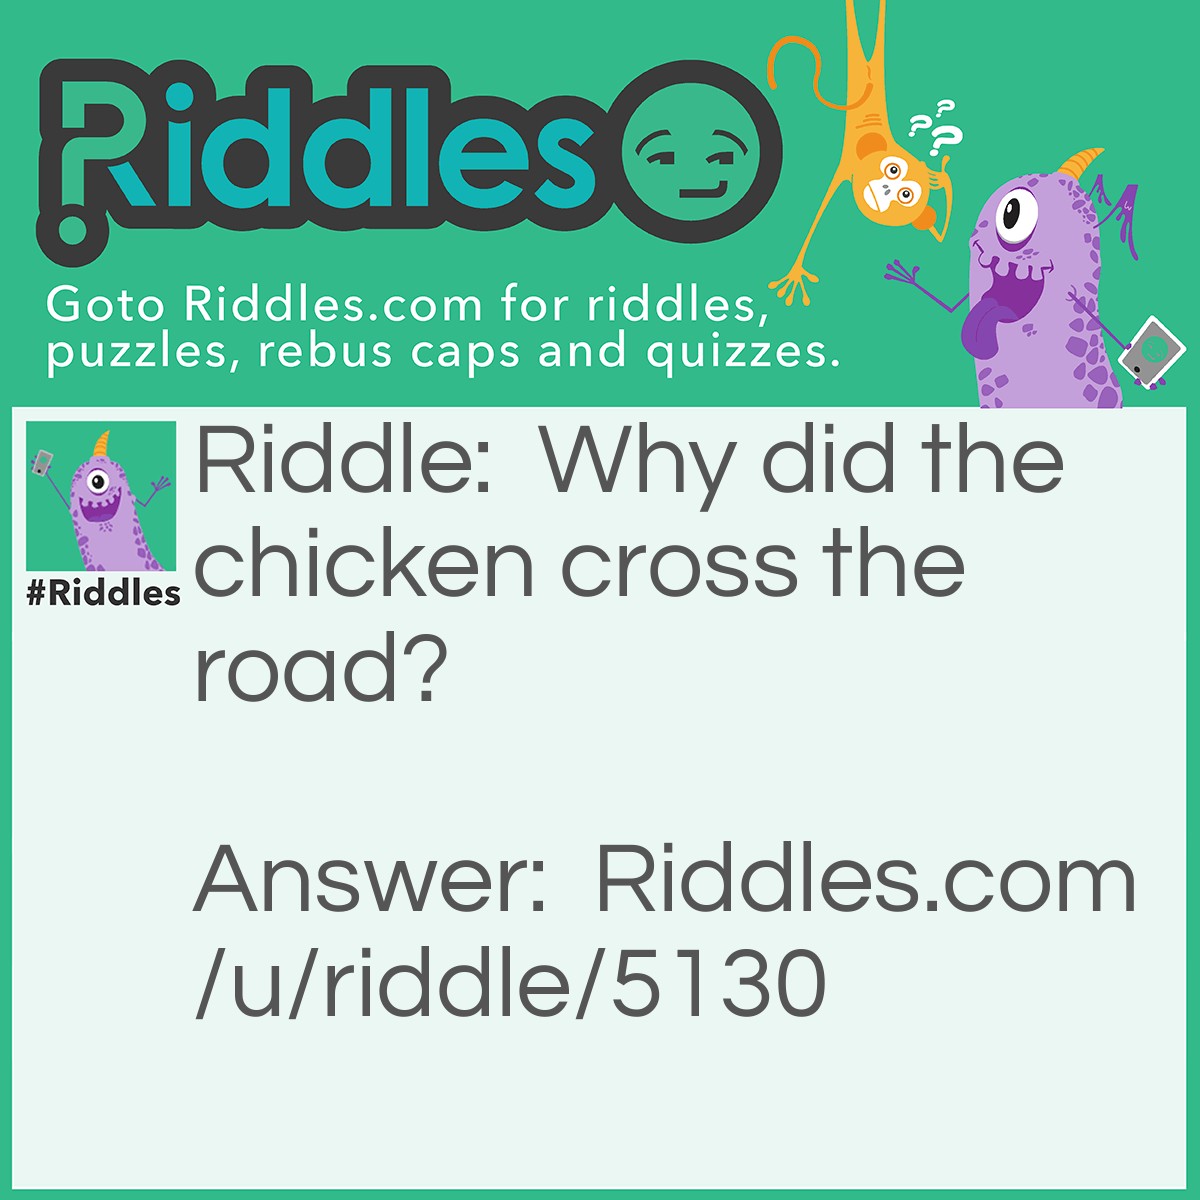 Riddle: Why did the chicken cross the road? Answer: What else? ;) To get to the other side.